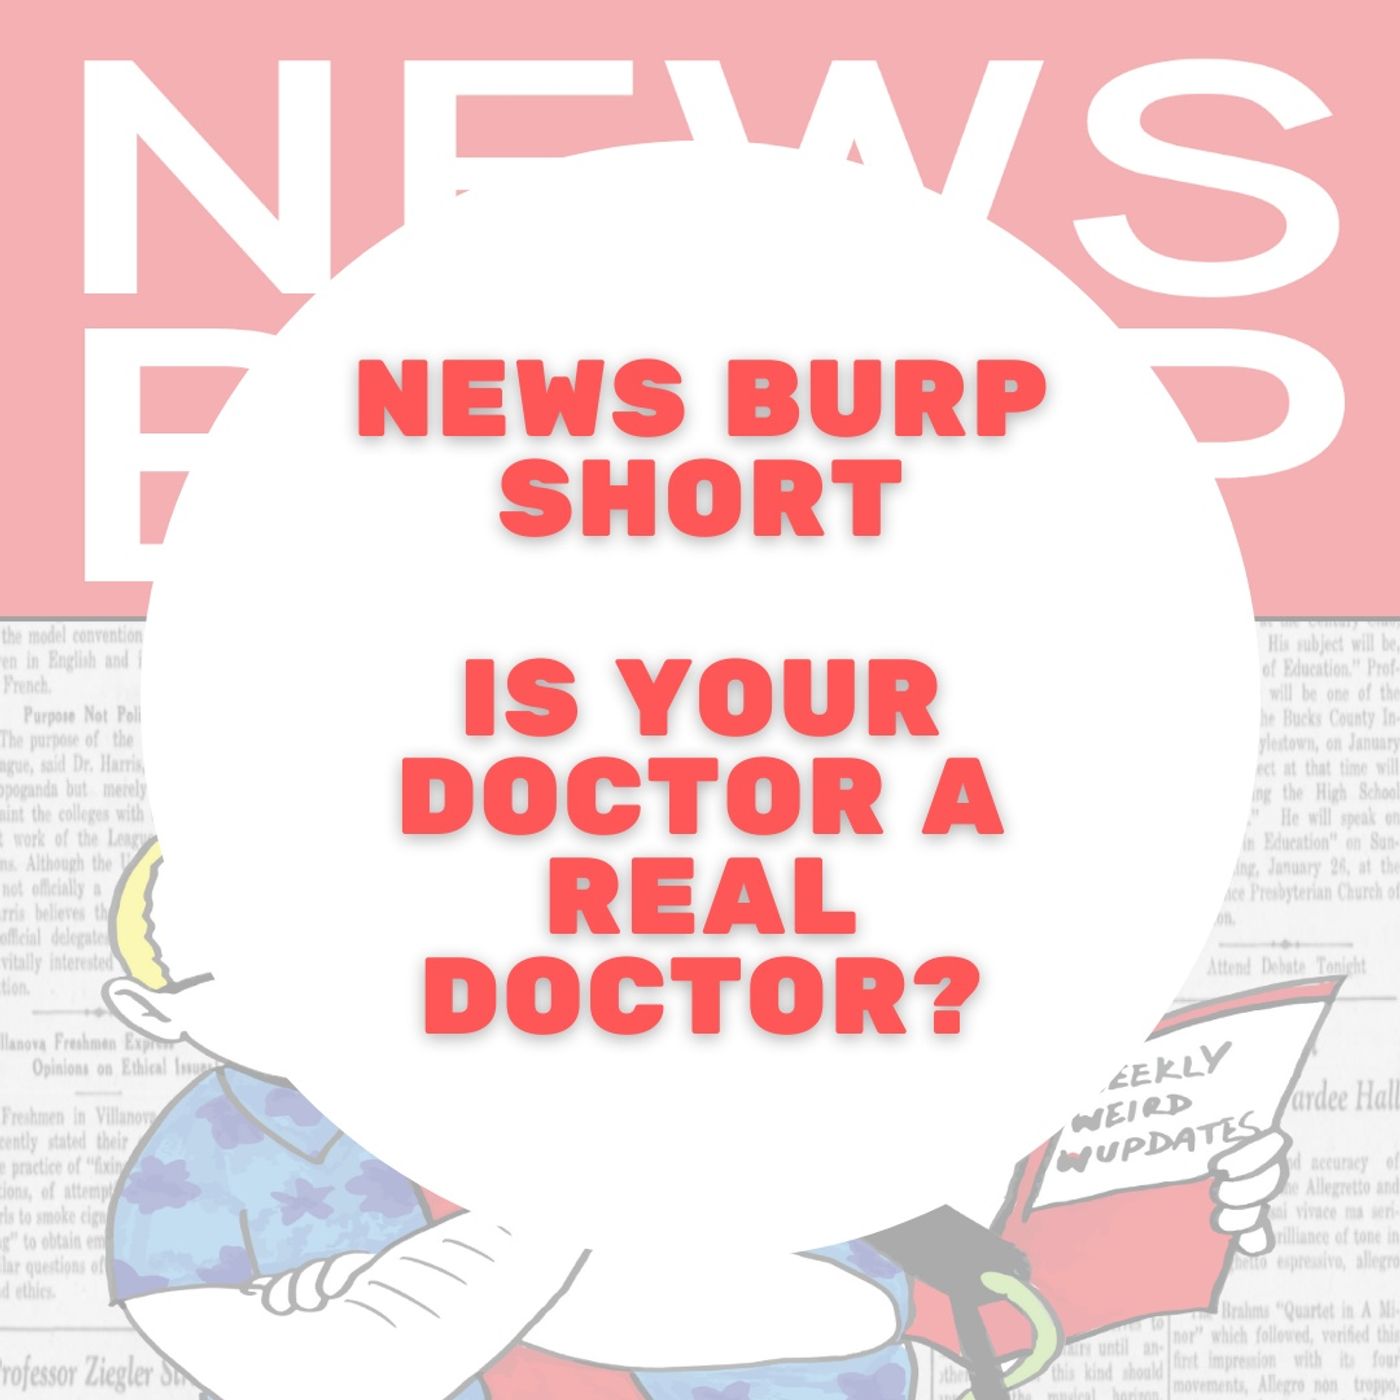 News Burp Short - Is Your Doctor a Real Doctor?